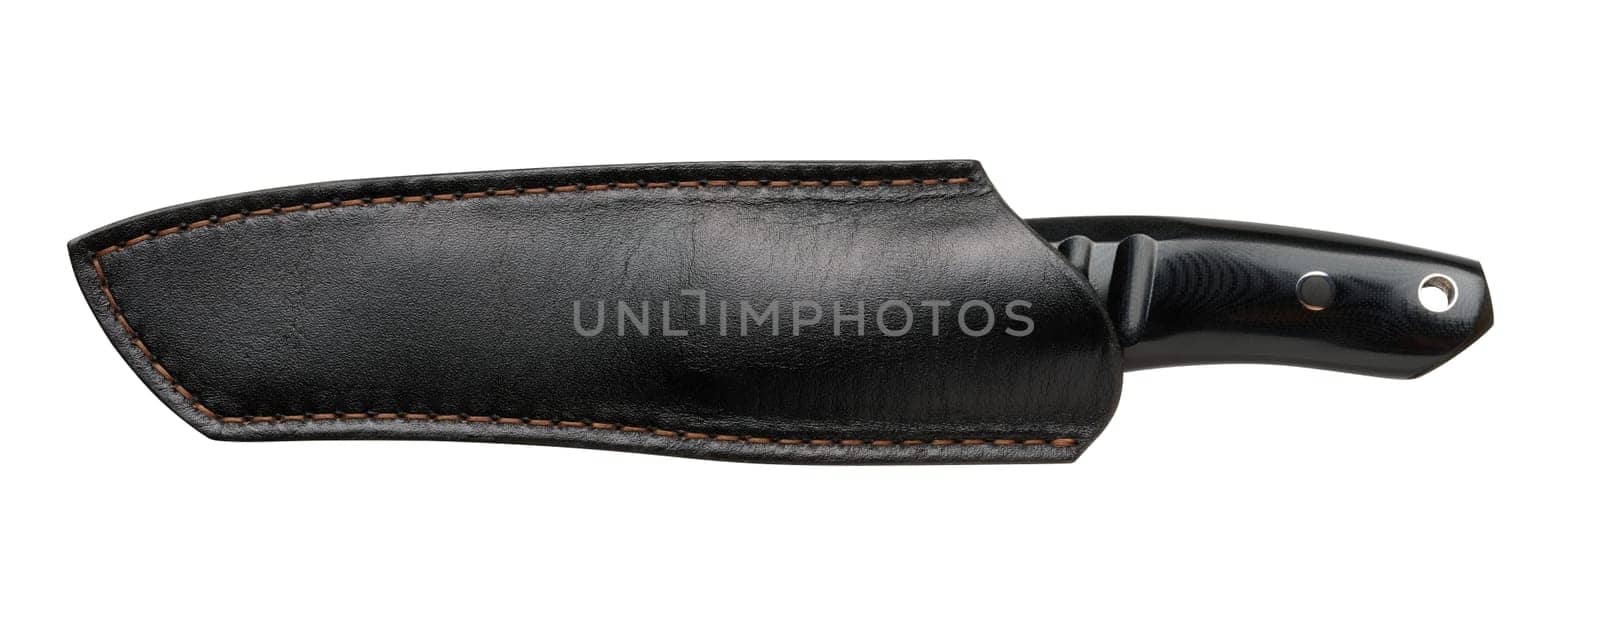 Tactical knife with a black handle in a leather case on an isolated background